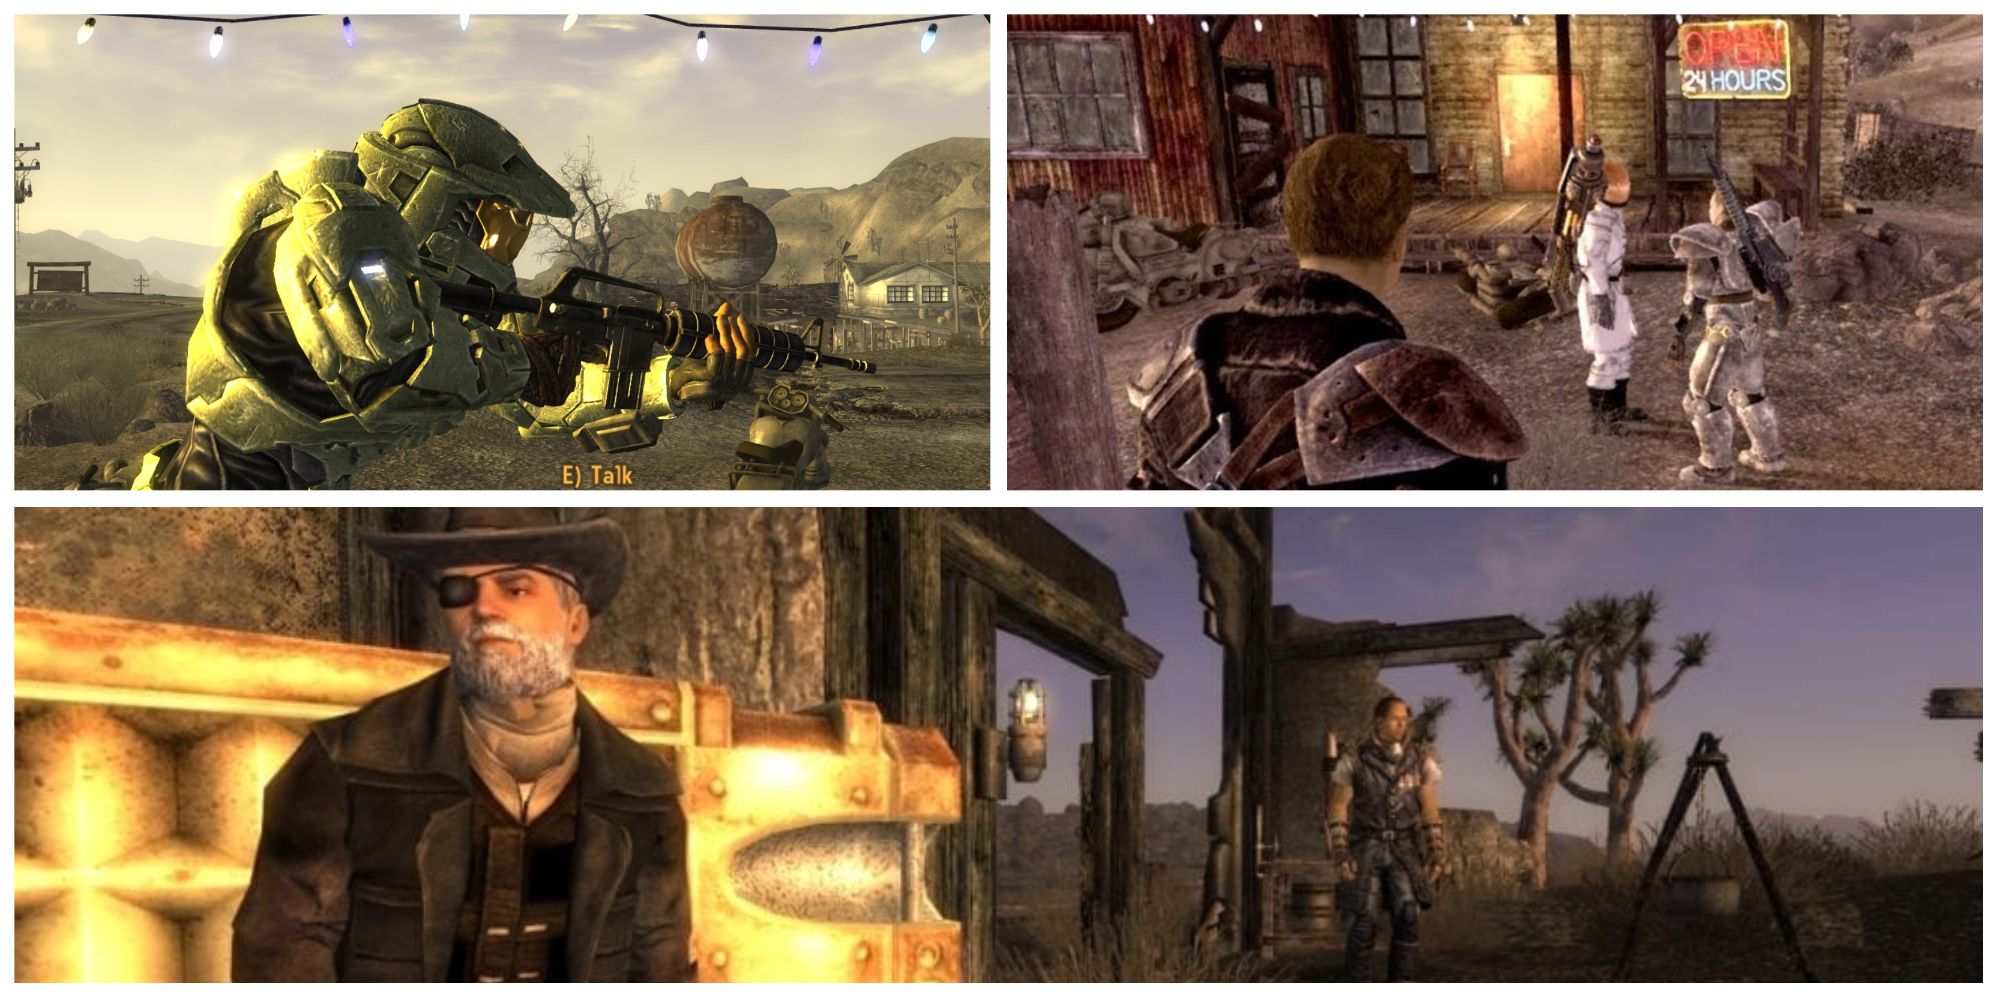 Fallout New Vegas multiplayer mod: Co-op mode, how to play, and more